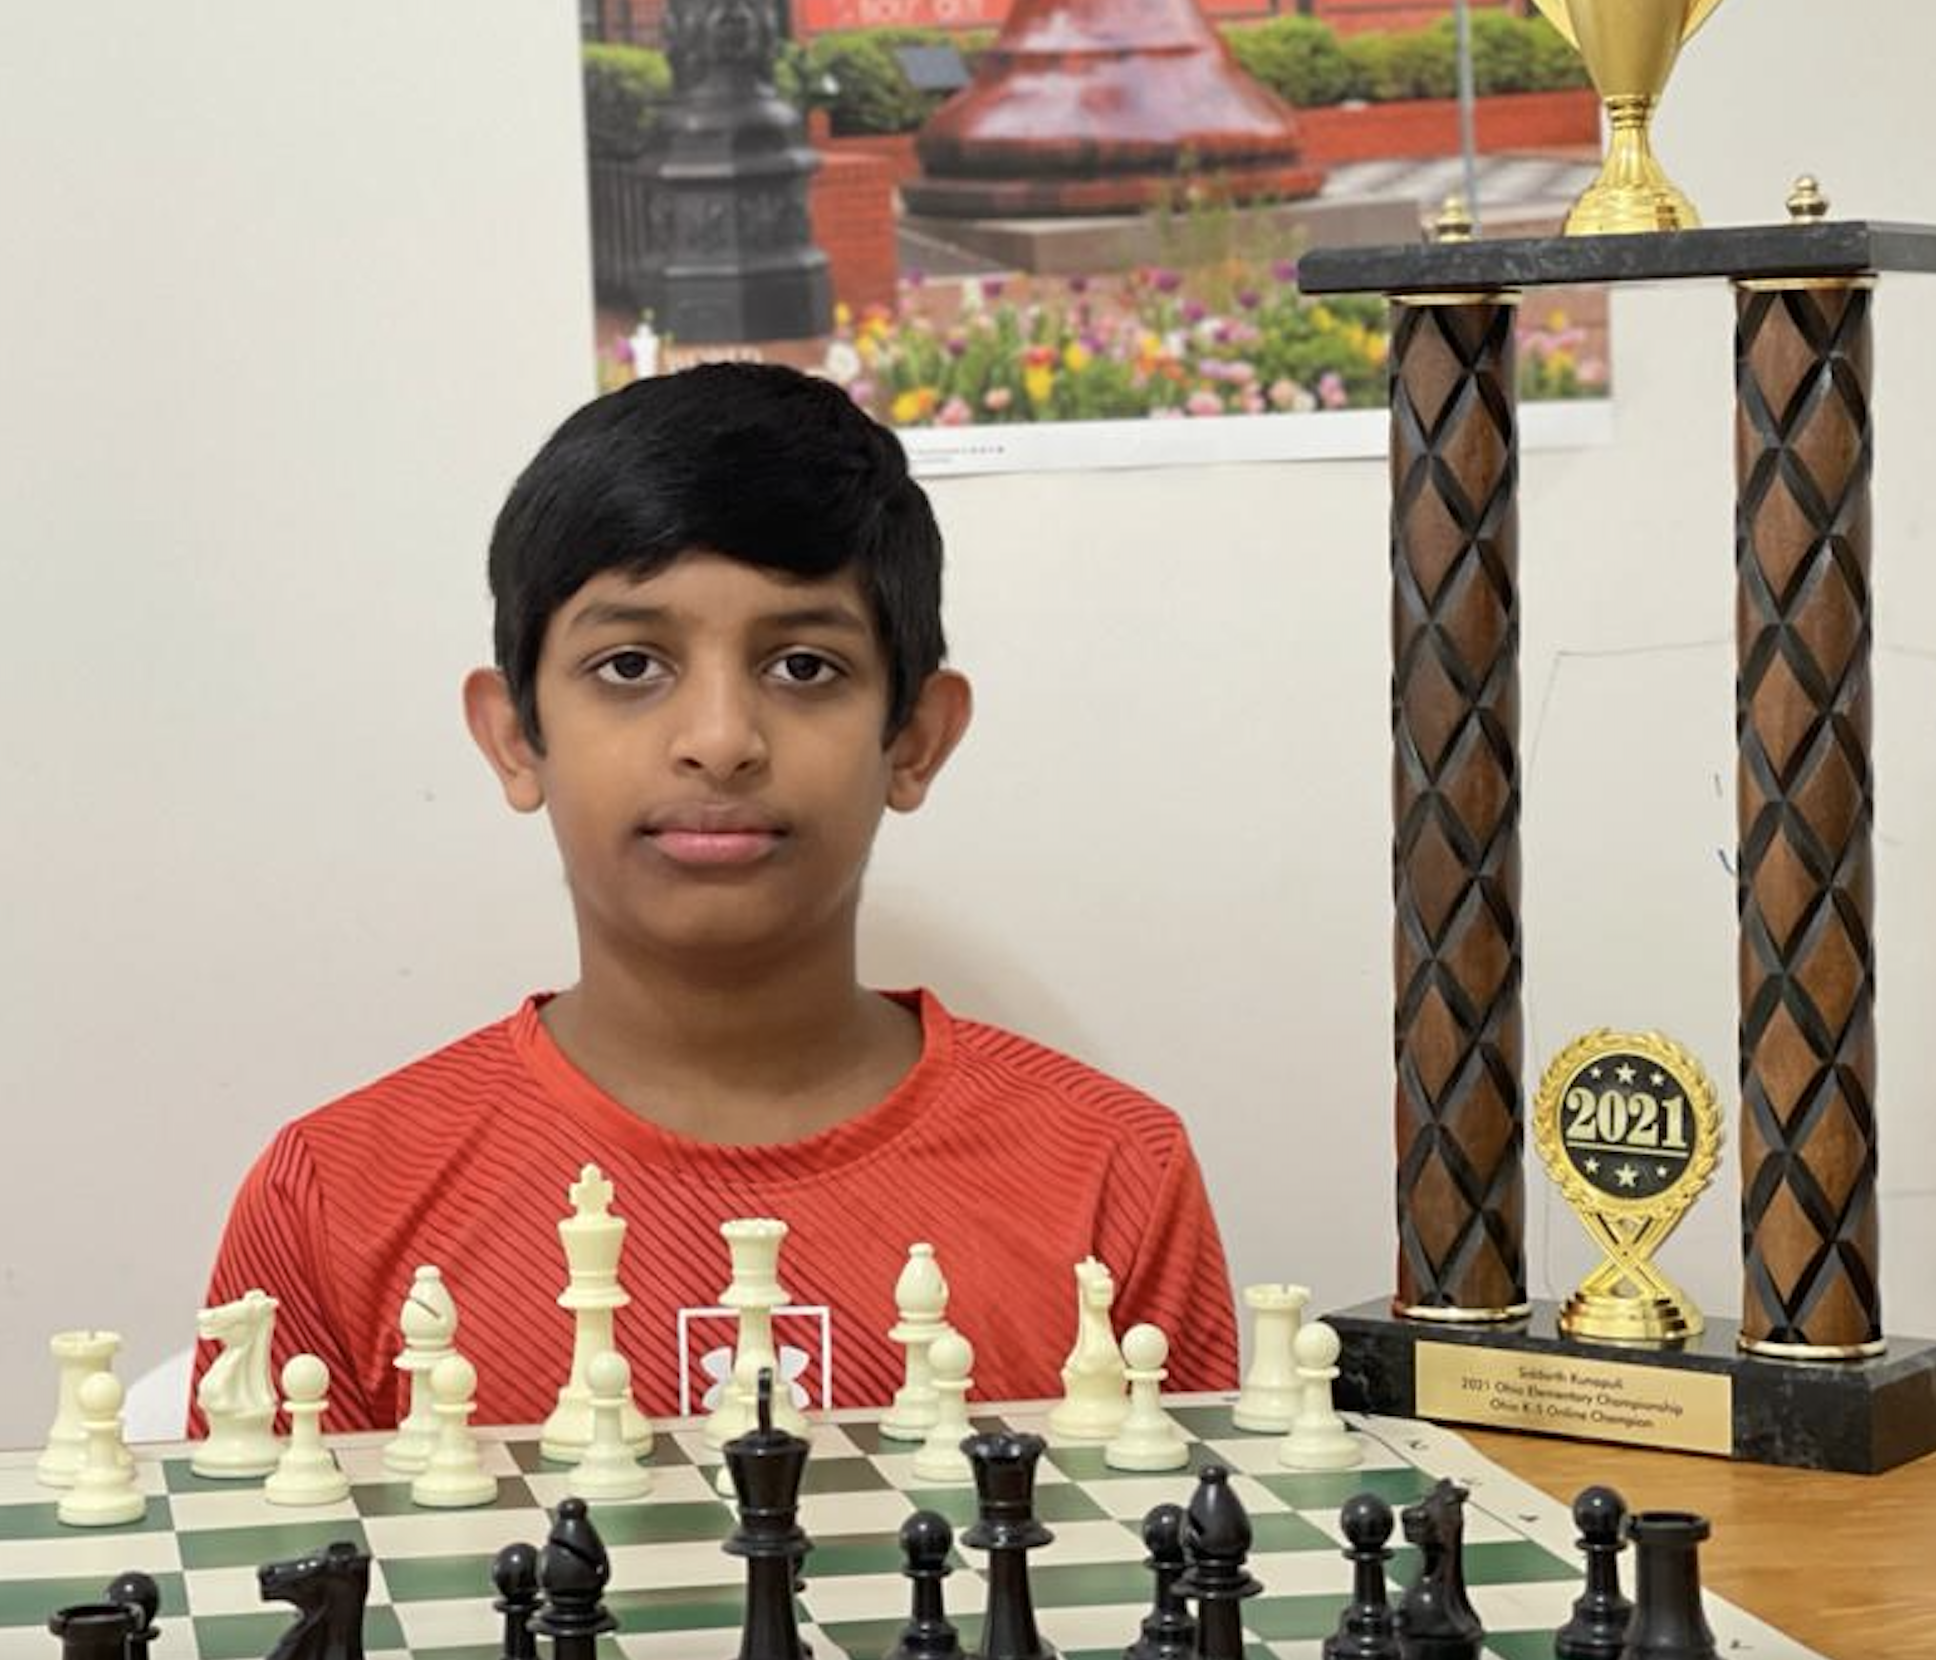 The Chess Champion's Journey